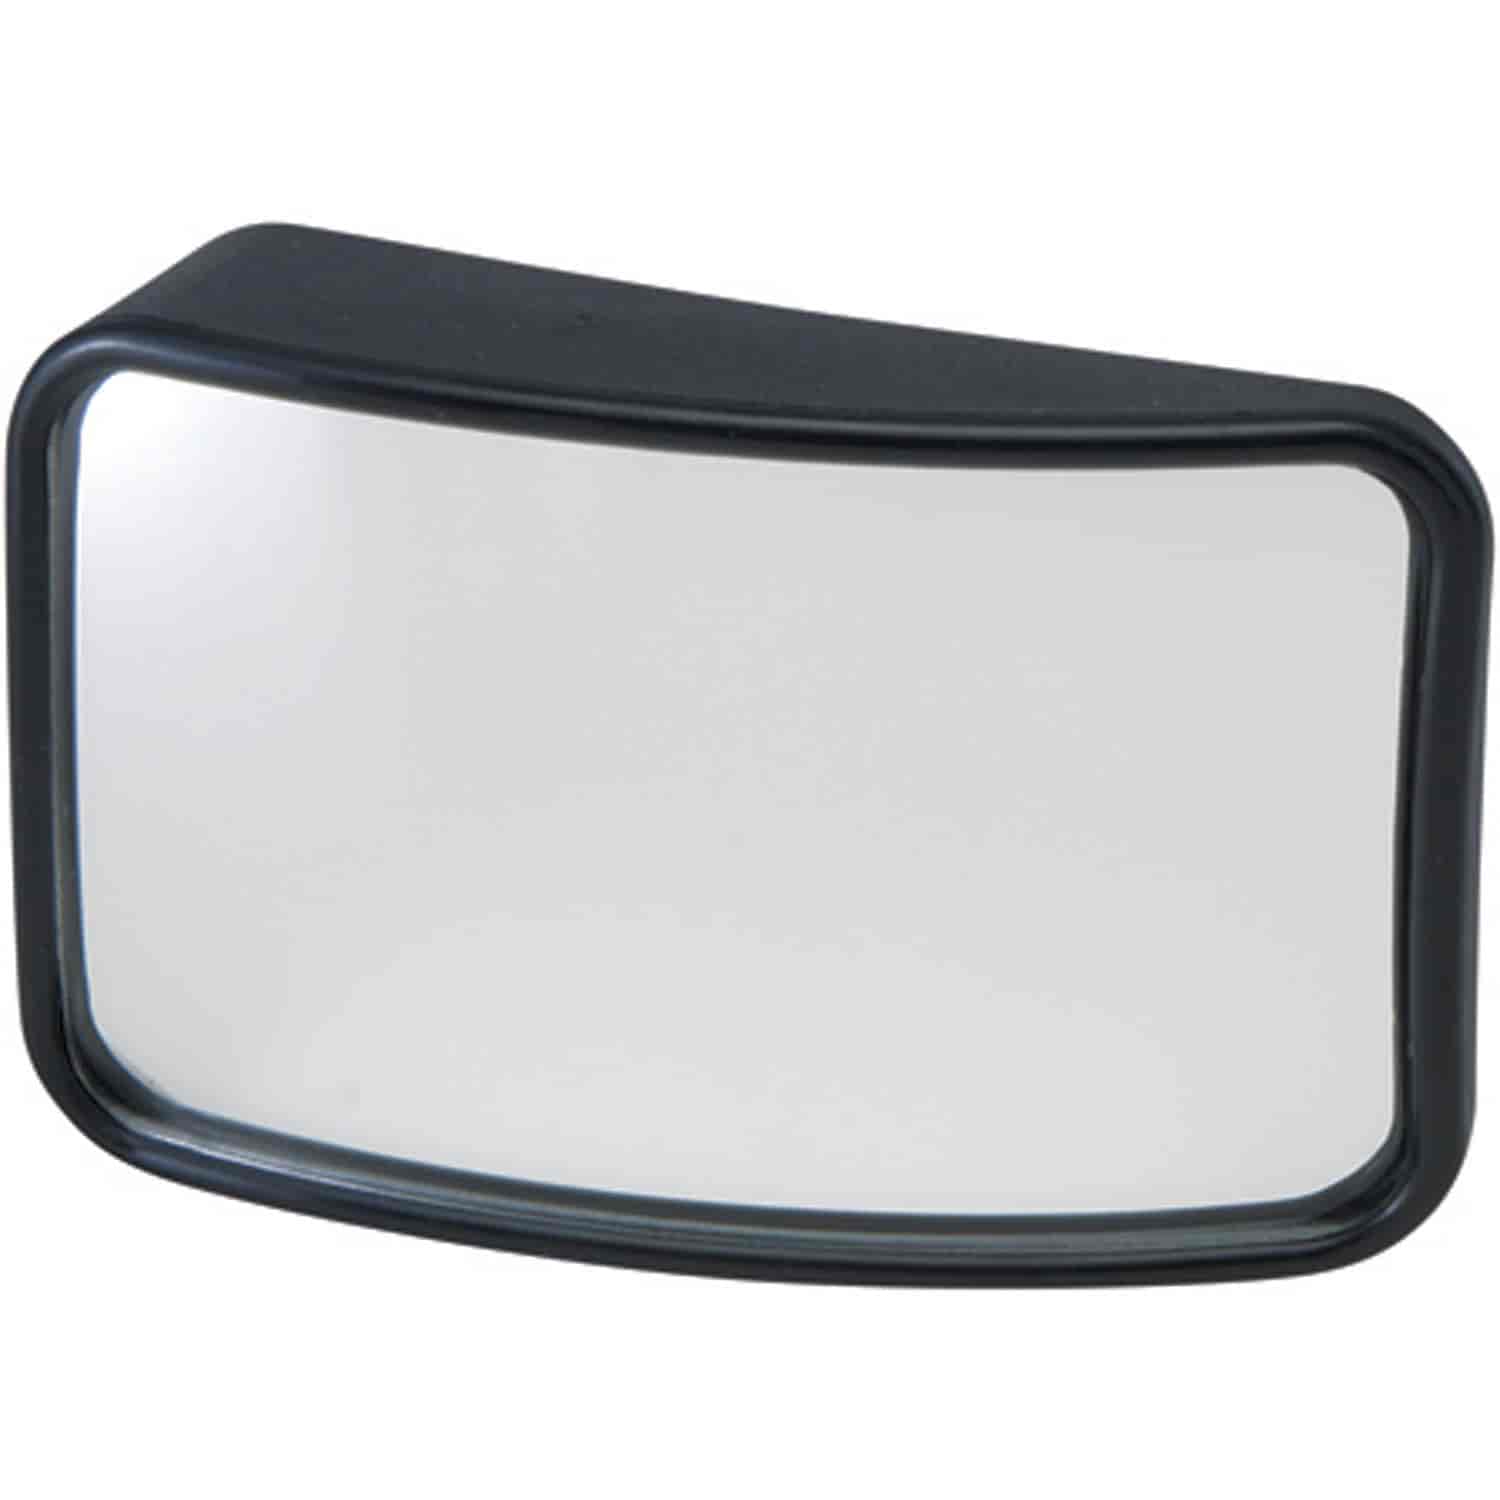 Spot Mirror 2 1/2 x 3 3/4 Wedge Easy Stick-on Installation Convex Lens increases visibility Includes